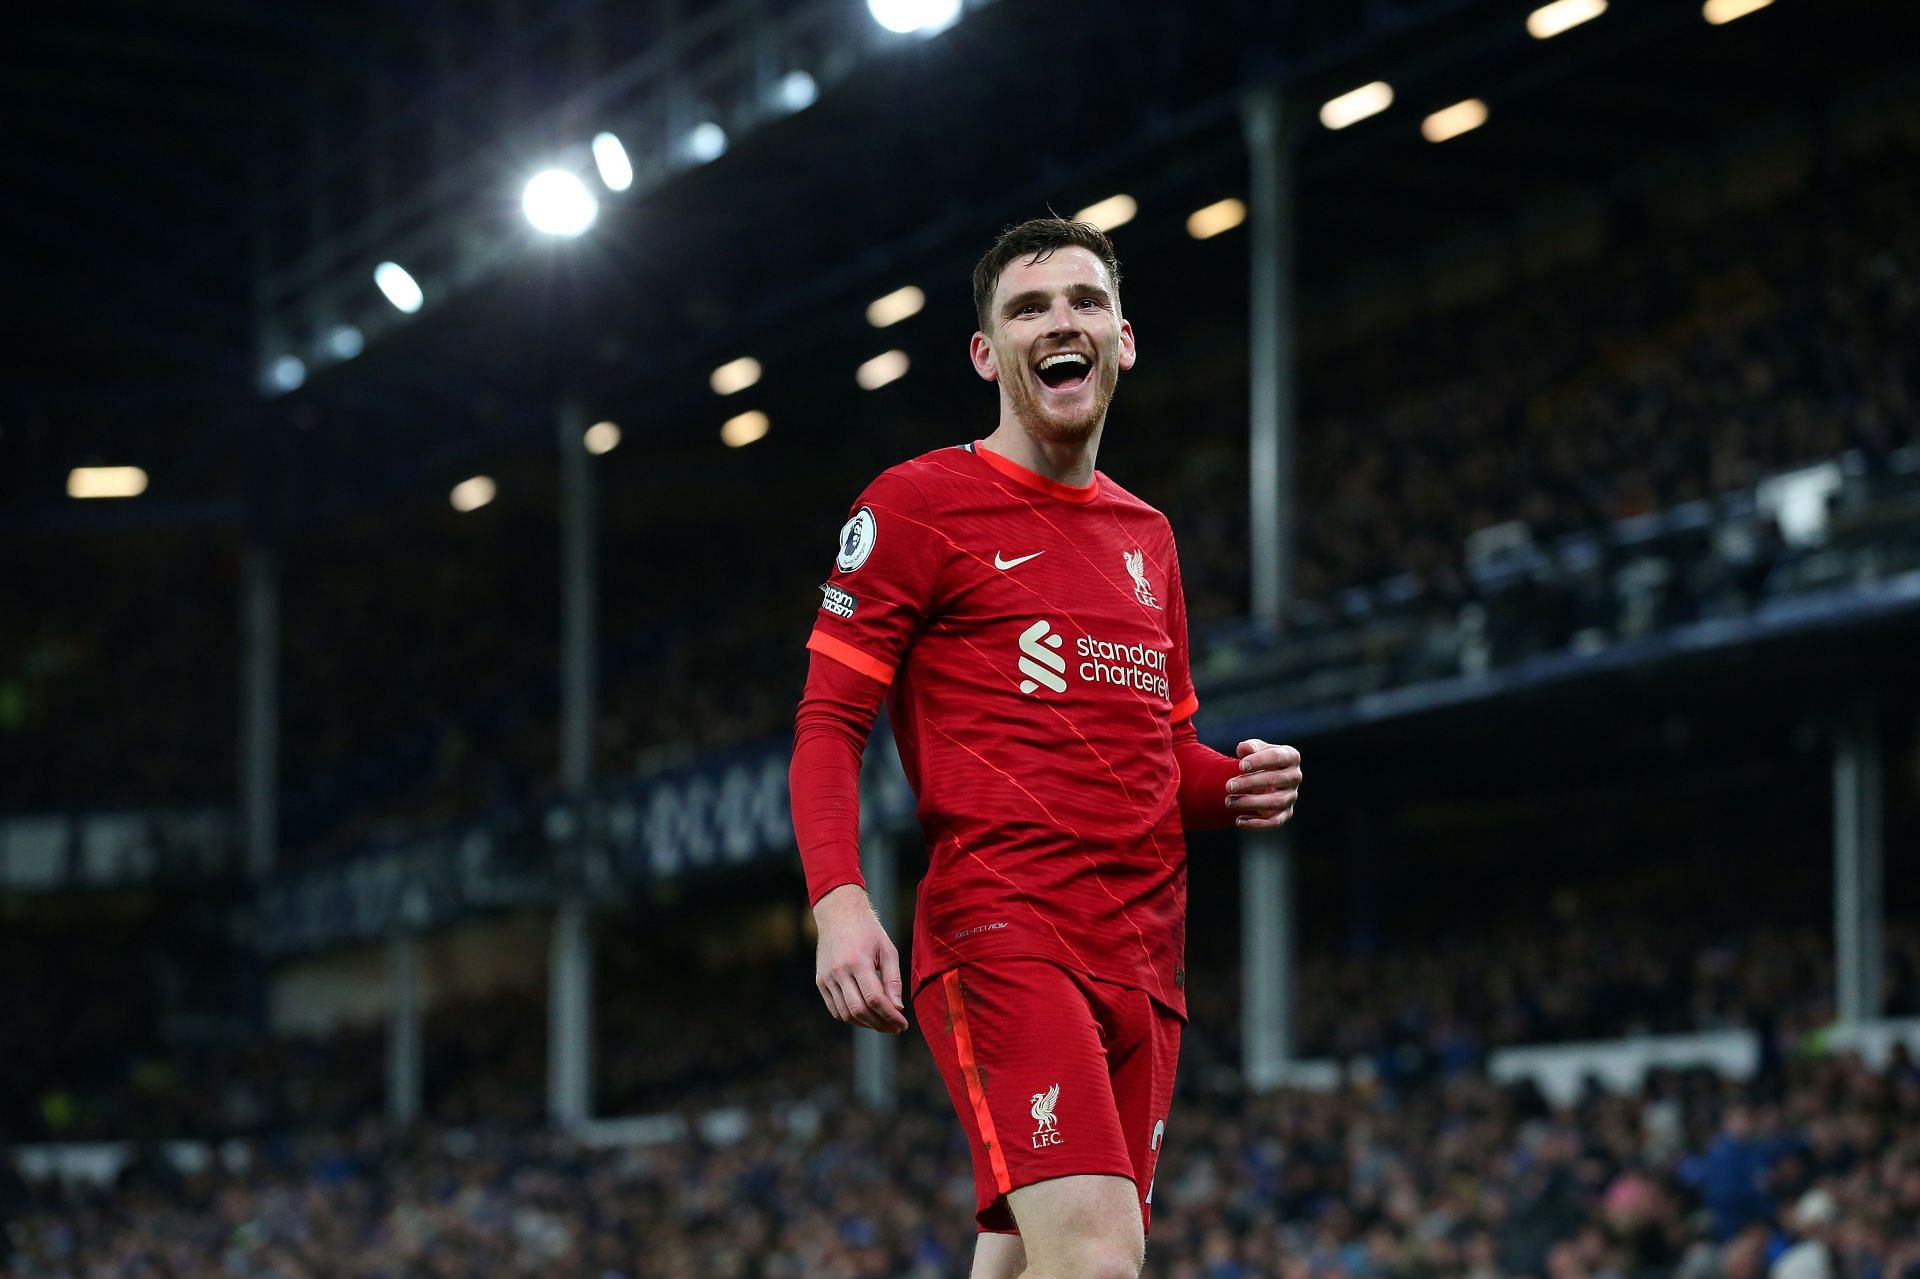 Andy Robertson is a prolific assist-creating defender in the Premier League.